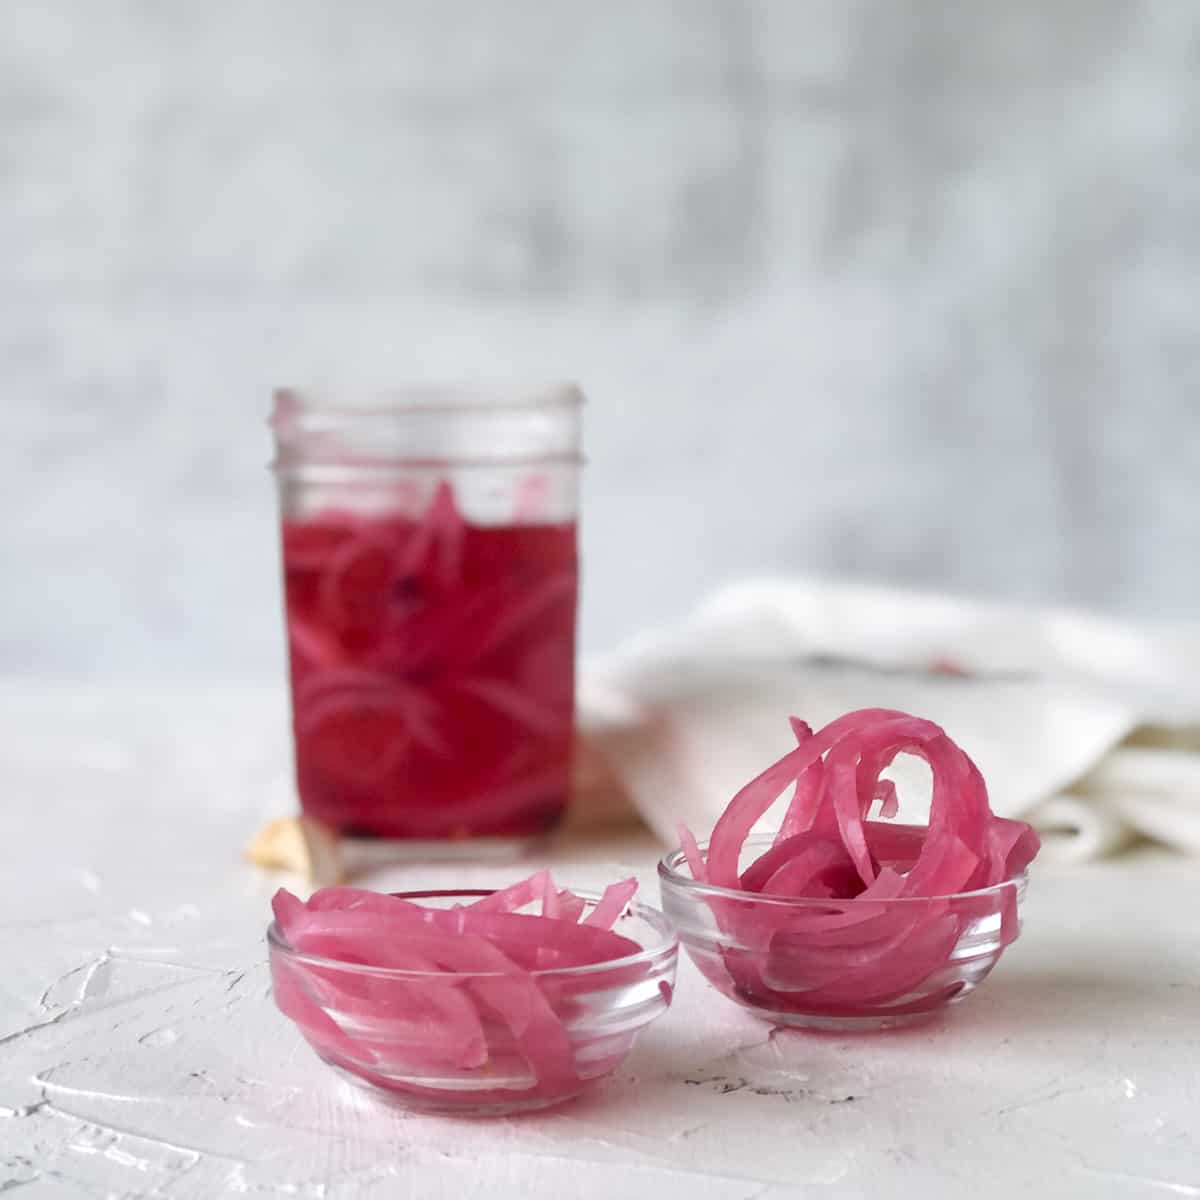 Pickled red onions in two small bowls and canning jar in background.